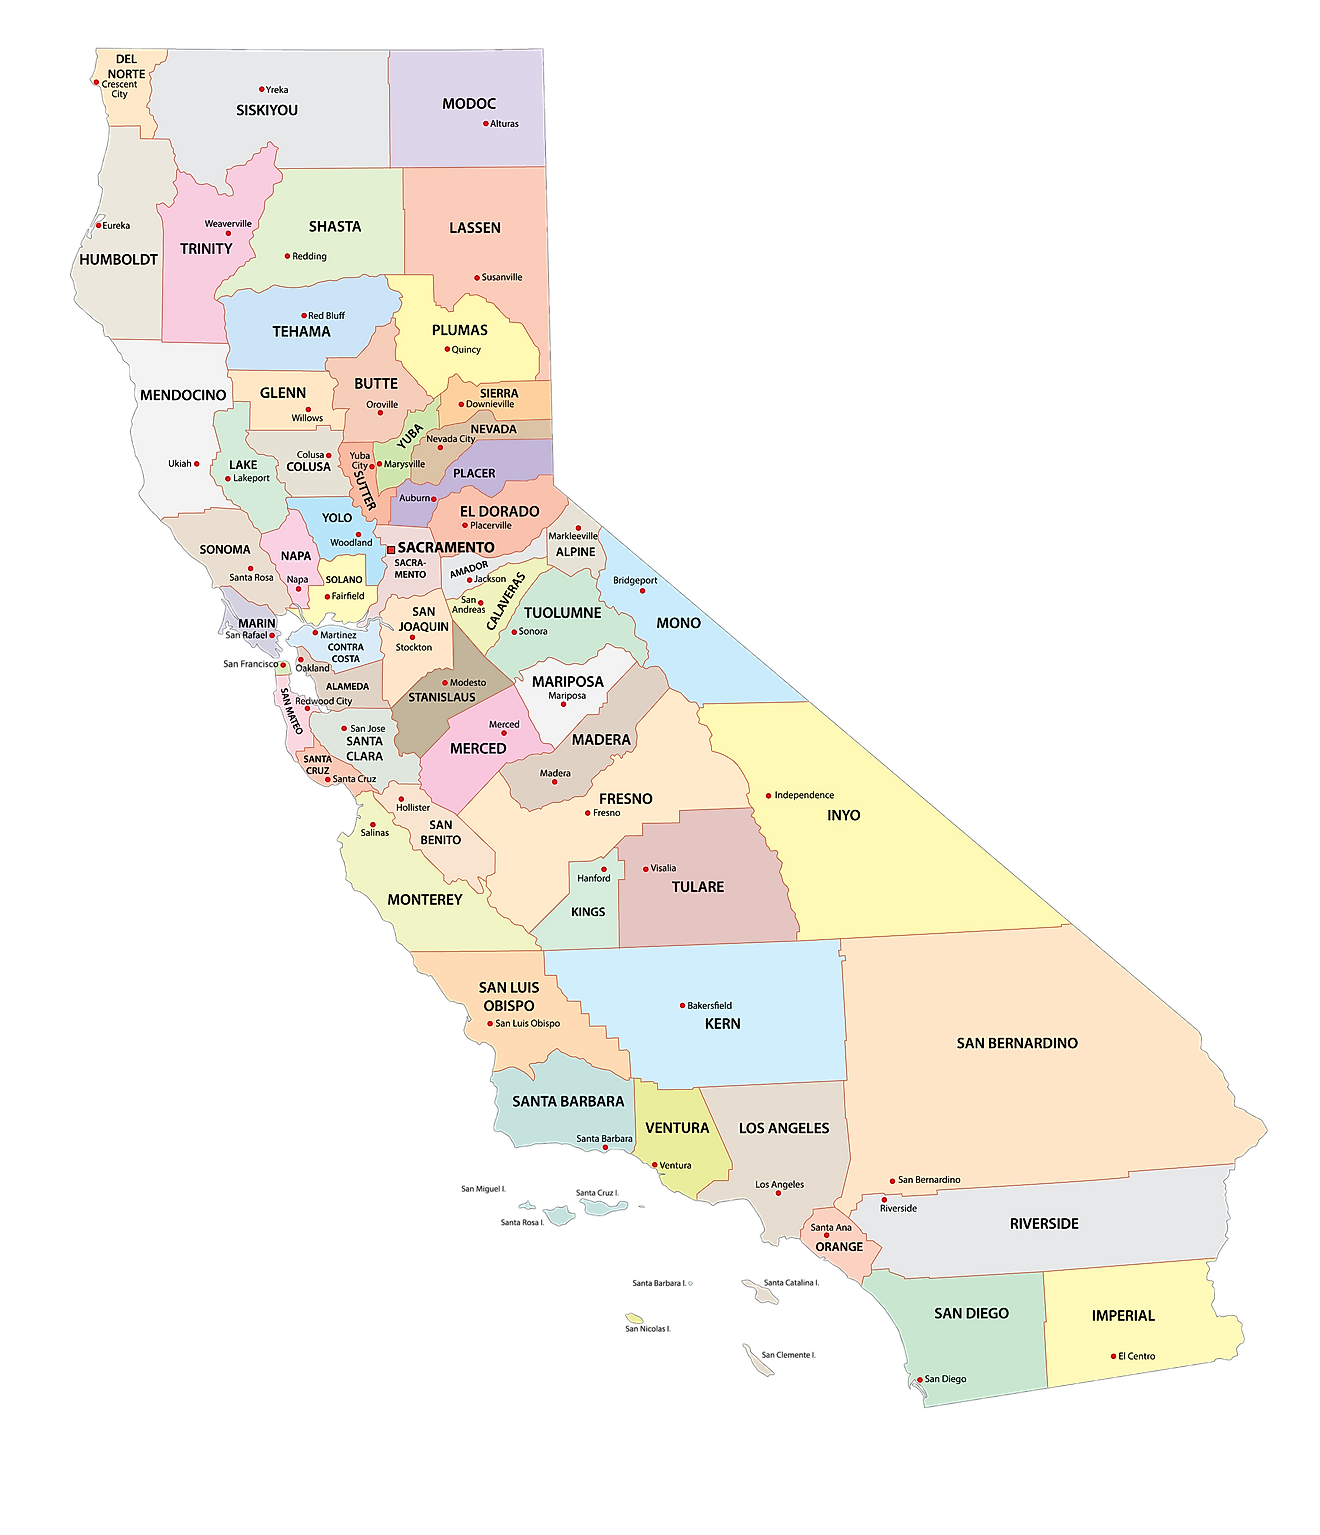 Administrative Map of California showing its 58 counties and the capital city - Sacramento